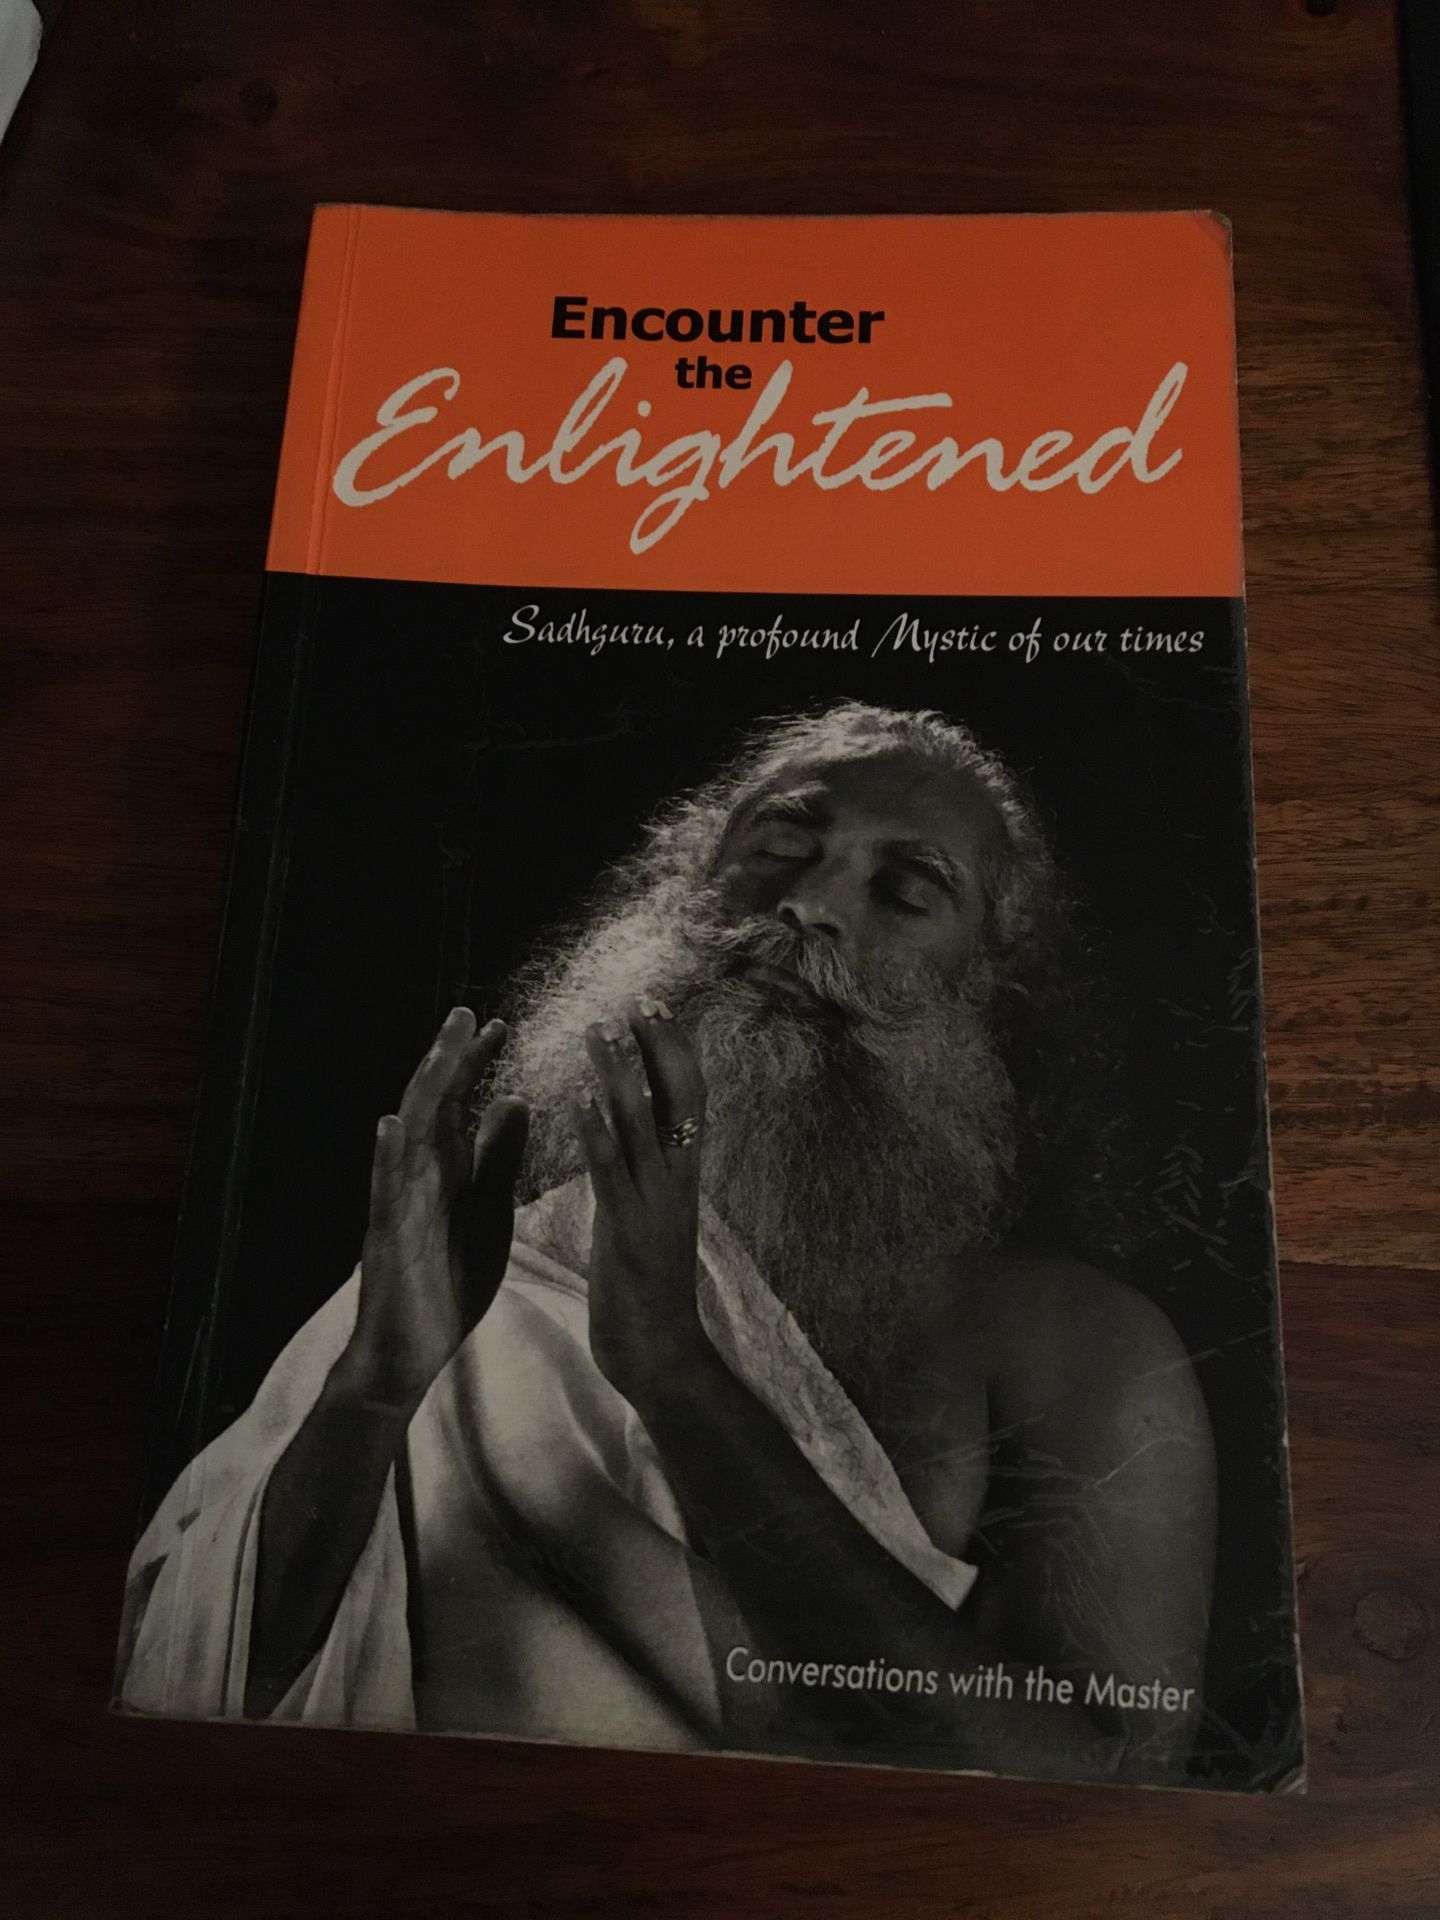 Encounter the Enlightened, Coversations with the Master, Sadhguru Jaggi Vasudev, 2003 softcover, Good condition